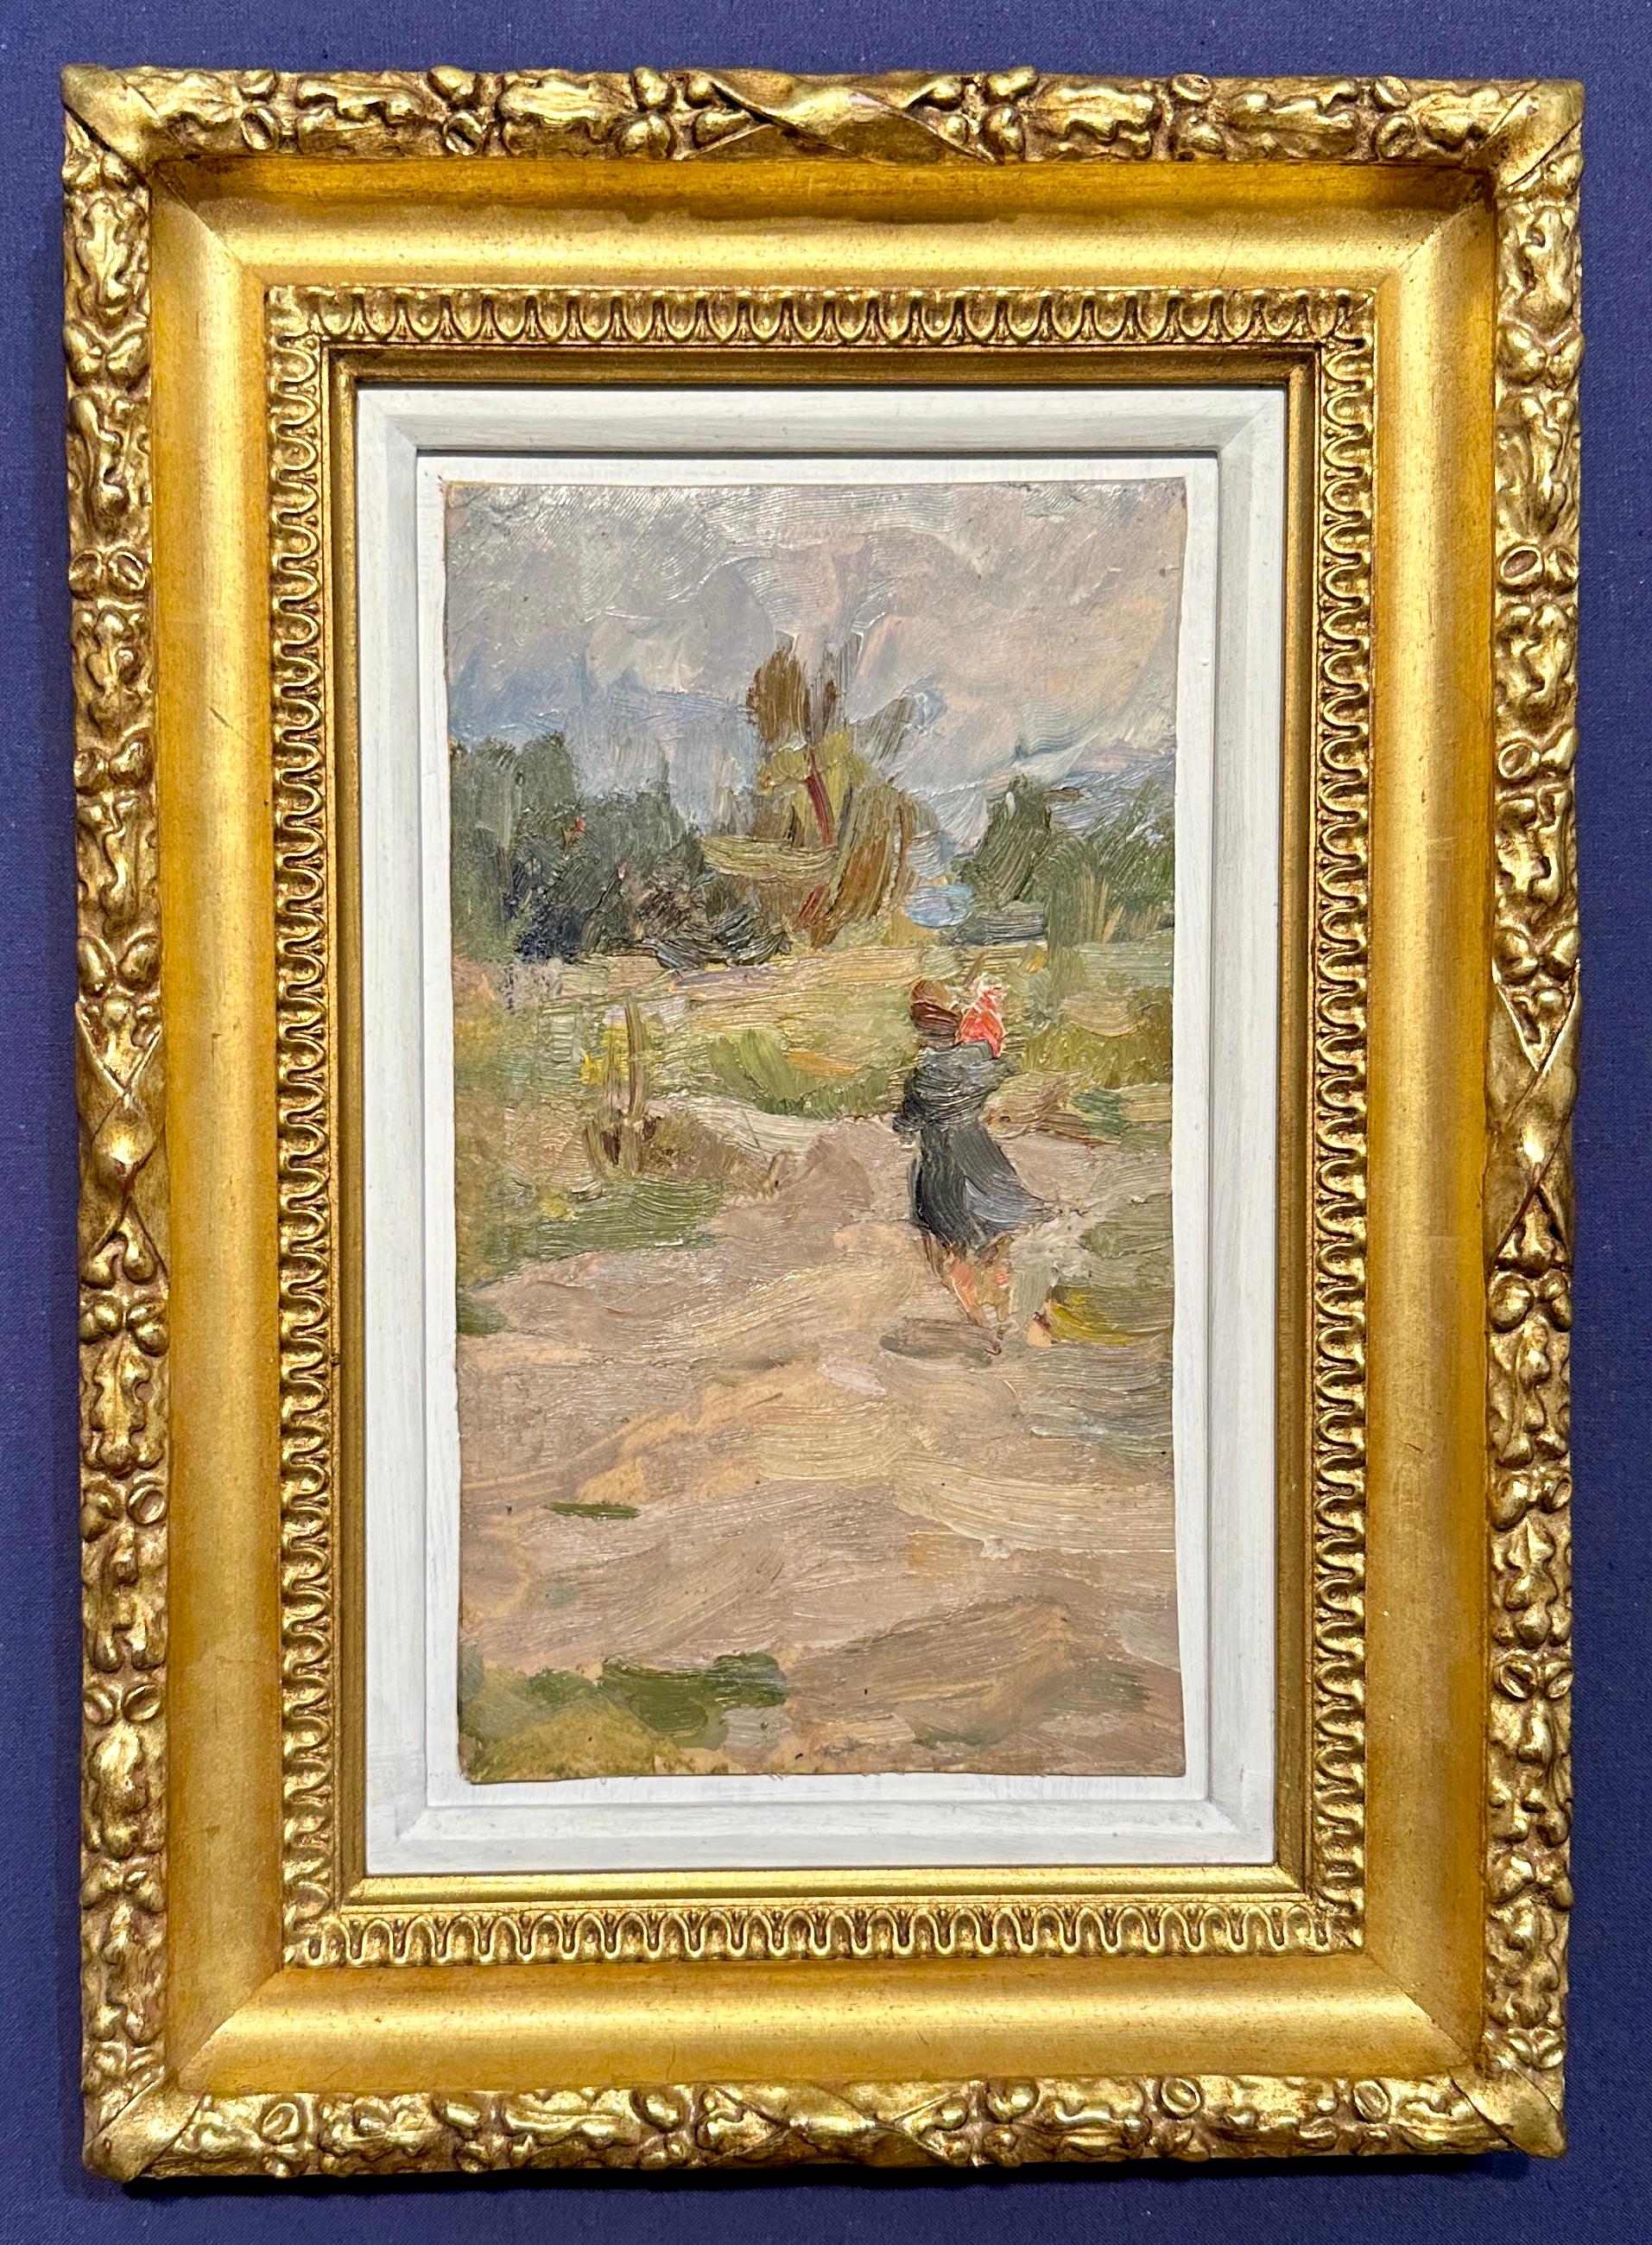 Ken Moroney Landscape Painting - 20th Century Oil painting, an Impressionist landscape with figures